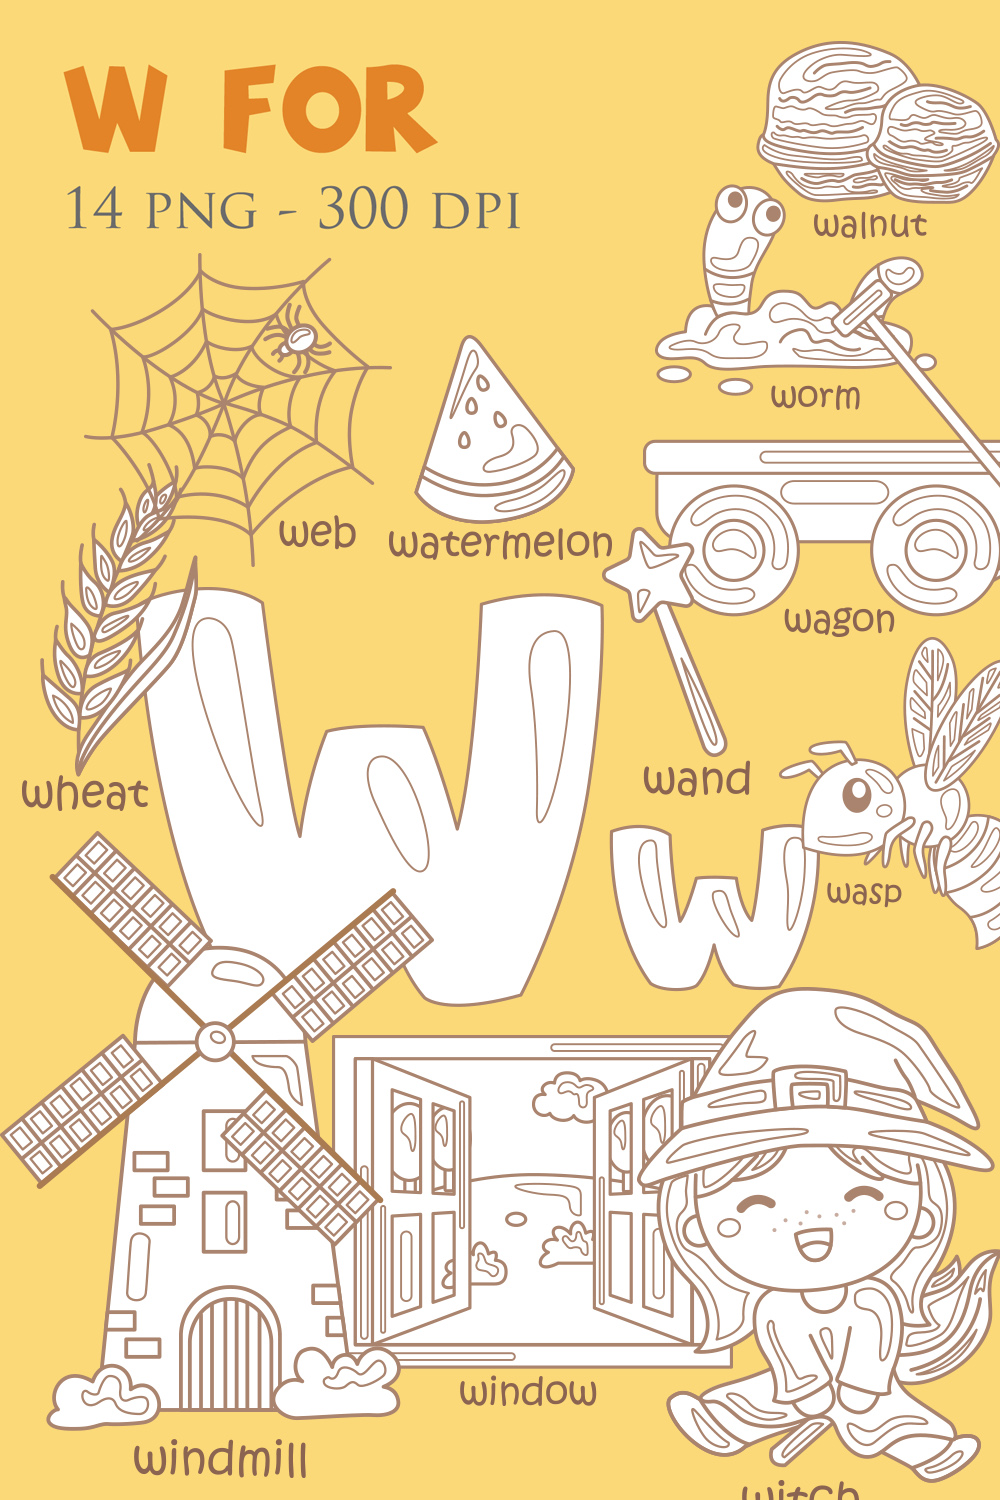 Alphabet W For Vocabulary School Letter Reading Writing Font Study Learning Student Toodler Kids Witch Wagon Web Worm Whale Watermelon Wheat Wand Window Windmill Walnut Wasp Cartoon Lesson Digital Stamp Outline pinterest preview image.